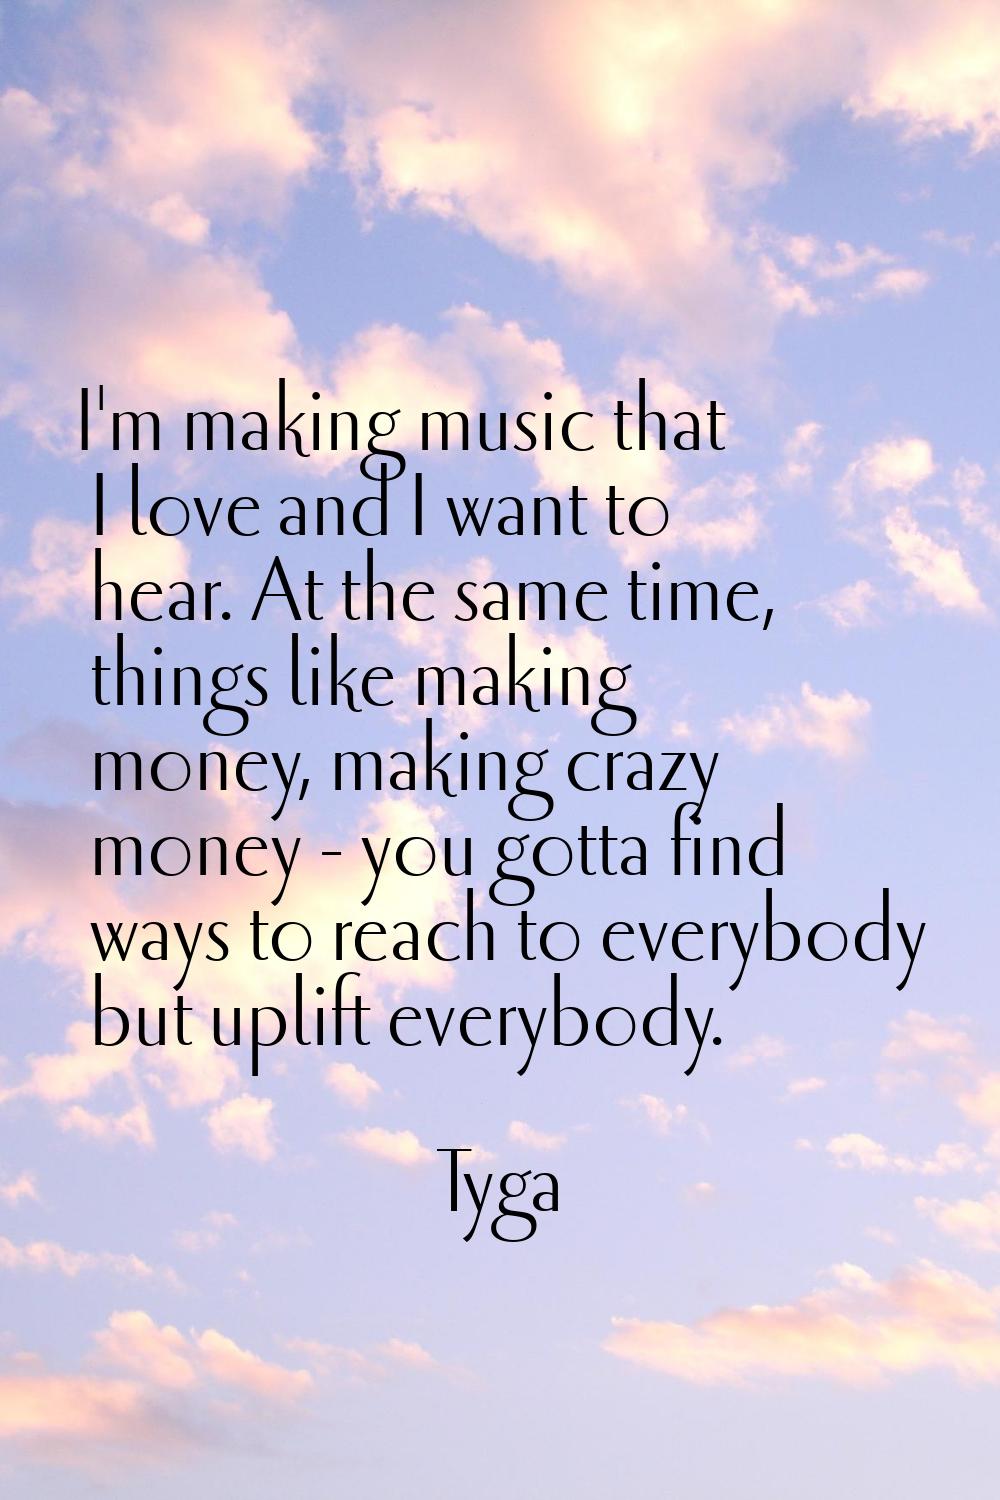 I'm making music that I love and I want to hear. At the same time, things like making money, making